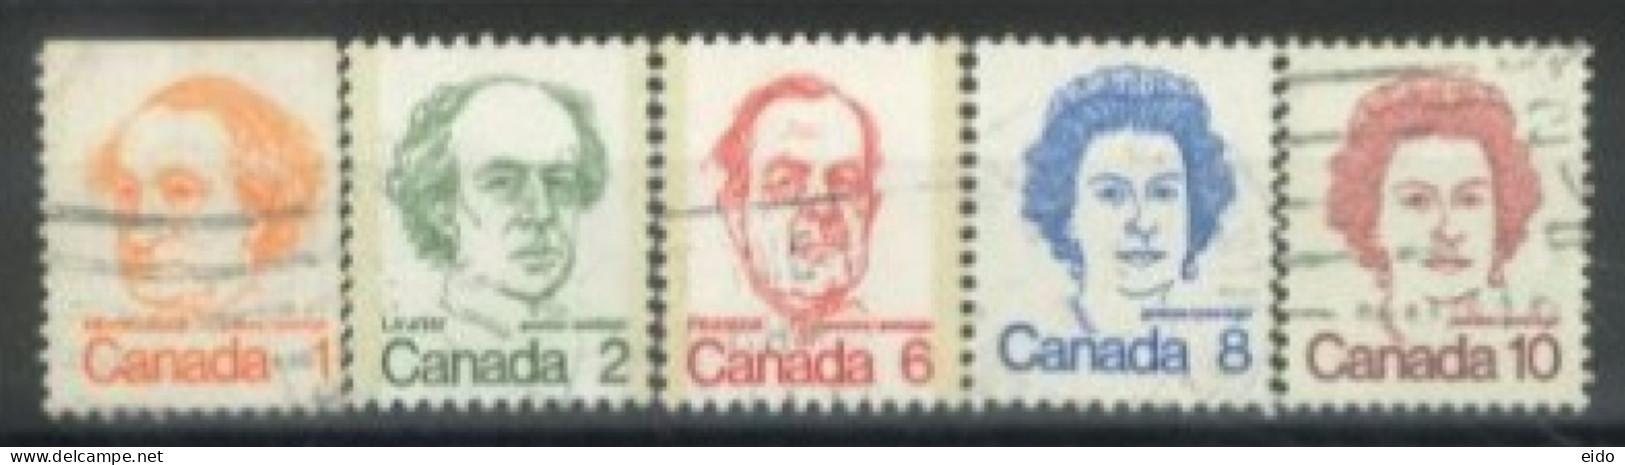 CANADA - 1972, CELEBRITIES STAMPS SET OF 5, USED. - Usati